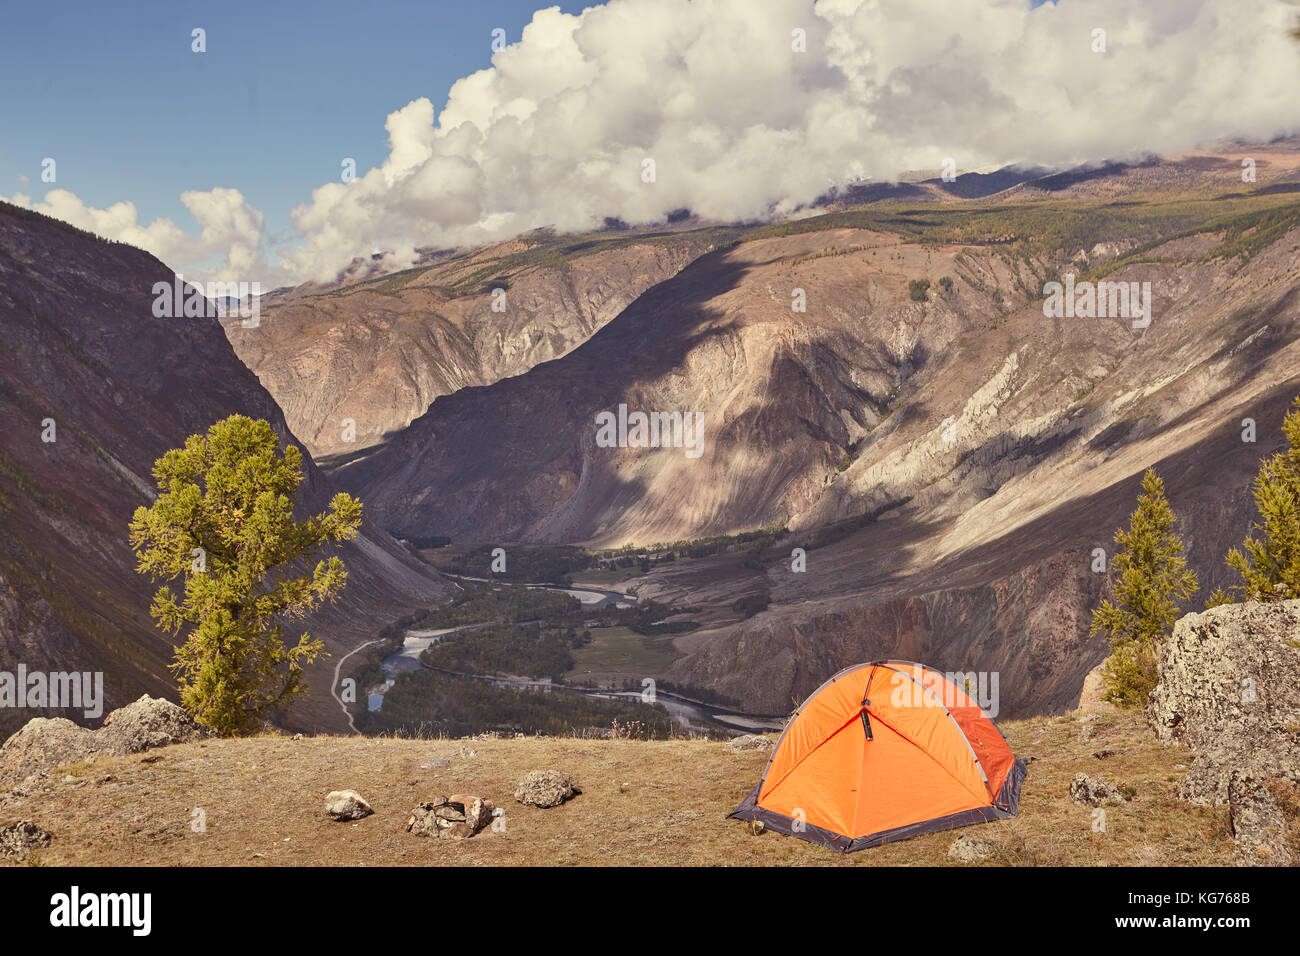 An orange tent at the edge of canyon Stock Photo